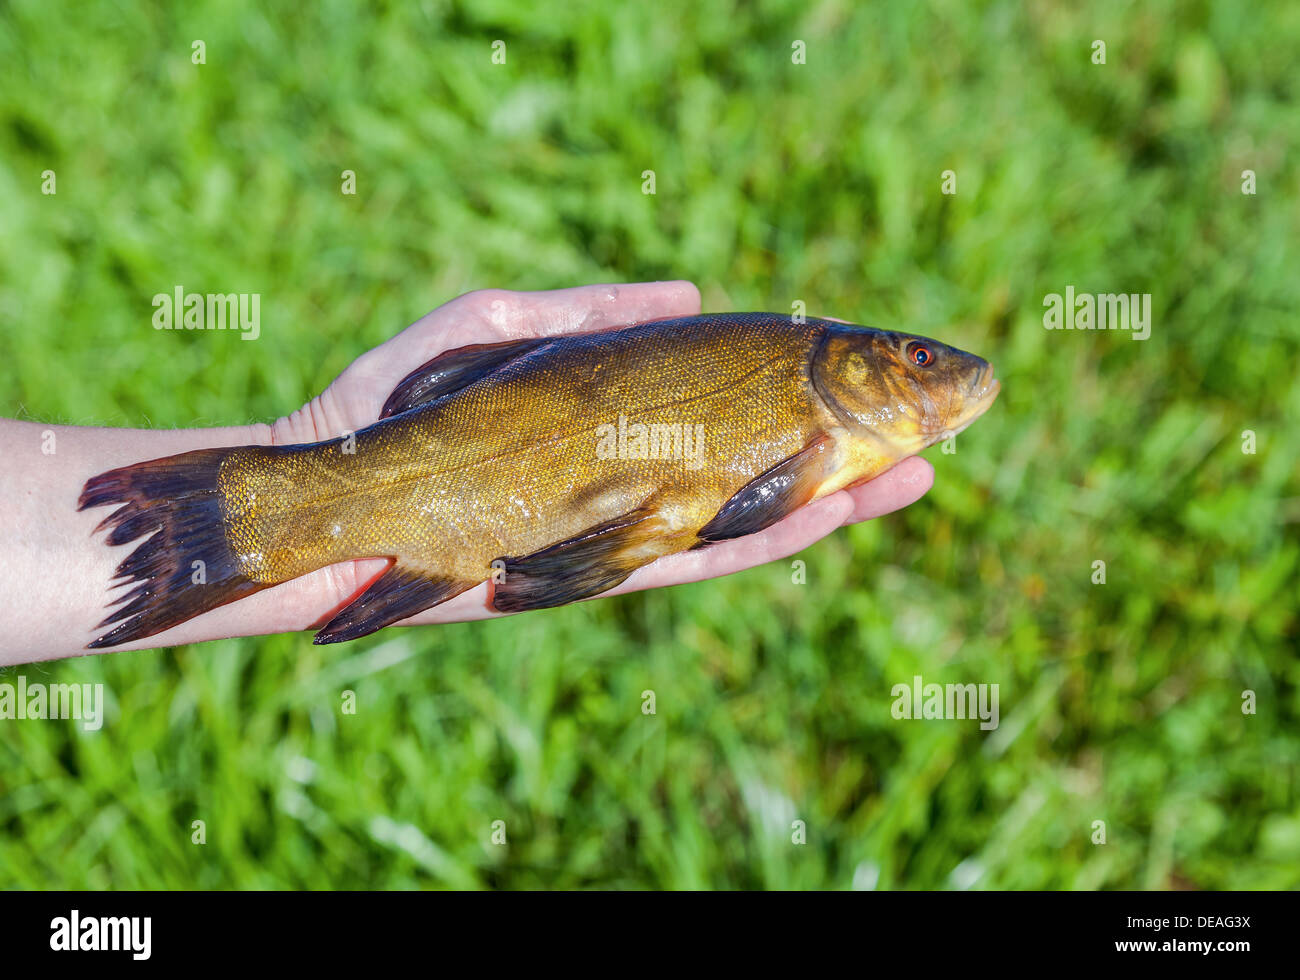 Large freshwater tench in the hand Stock Photo